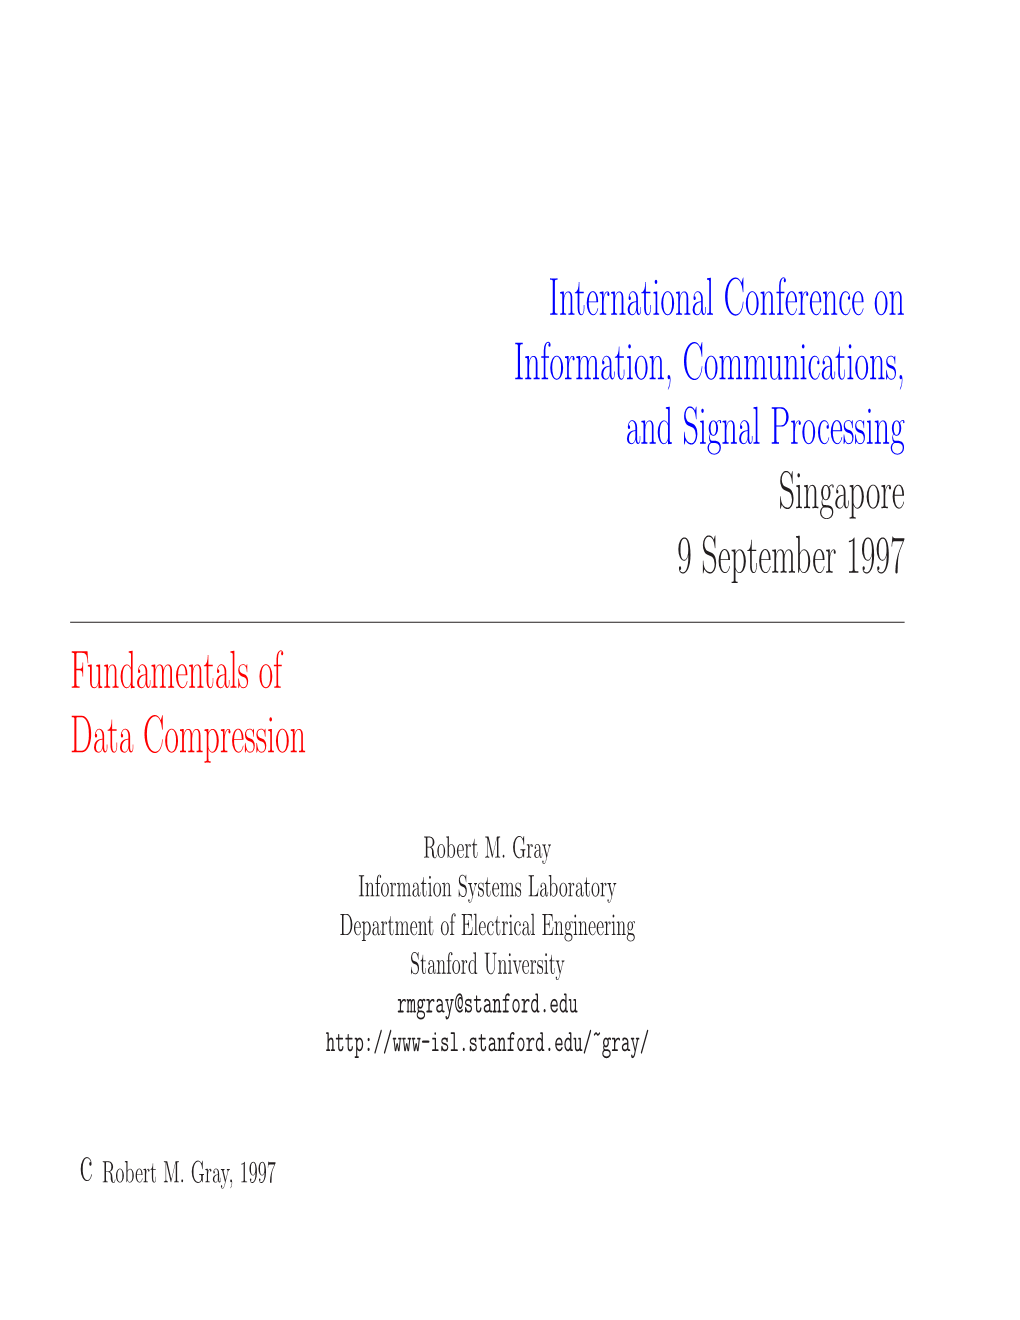 International Conference on Information, Communications, and Signal Processing Singapore 9 September 1997